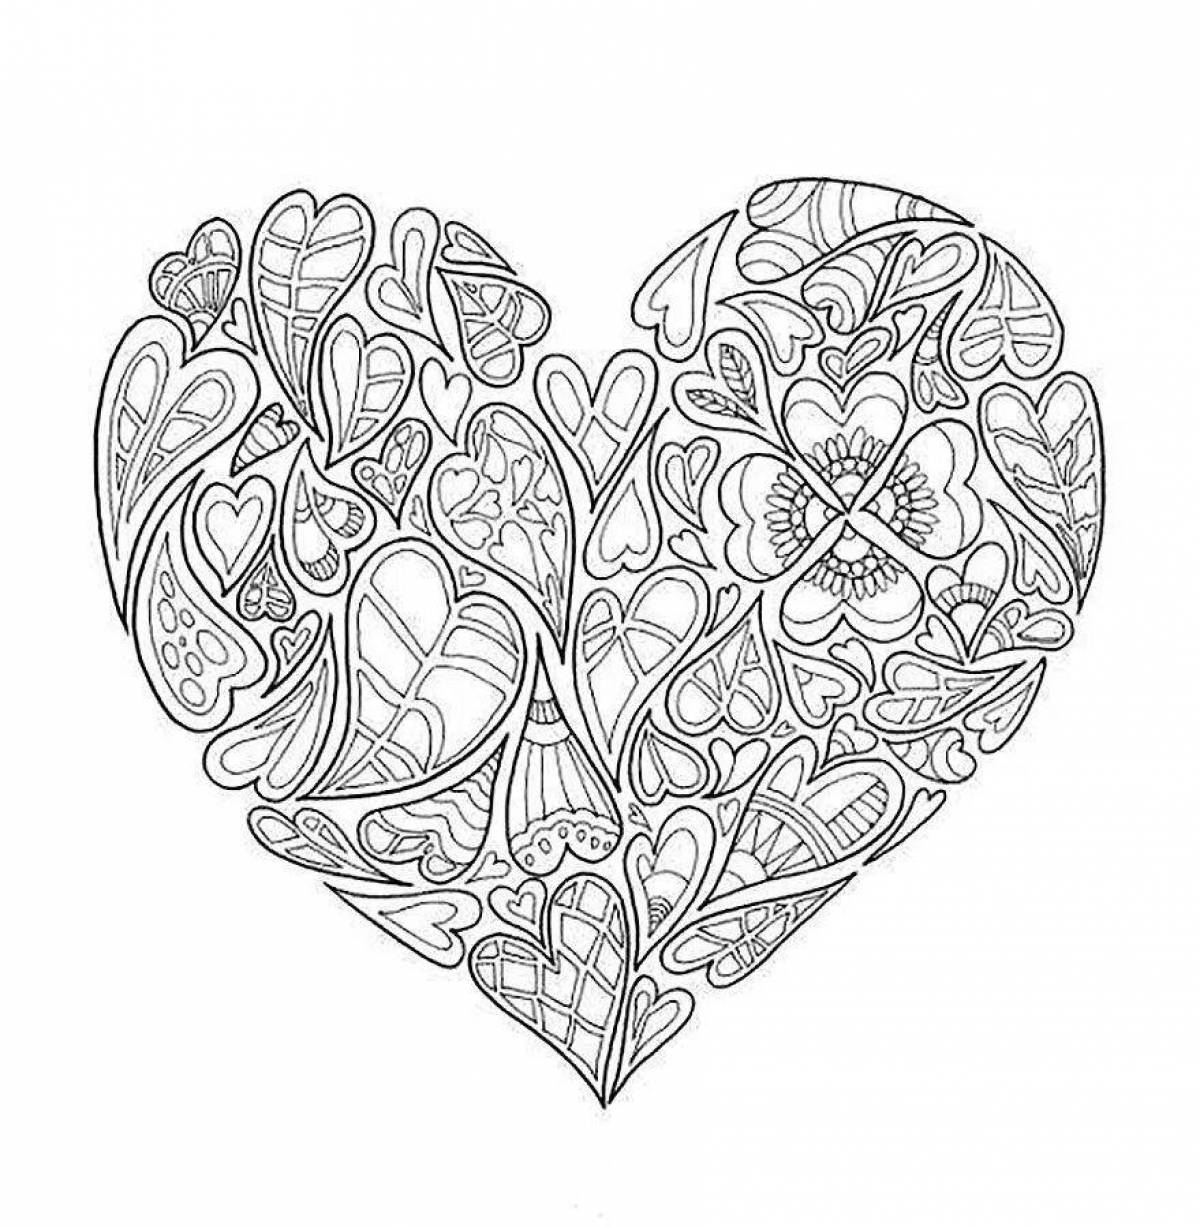 Soothing coloring book